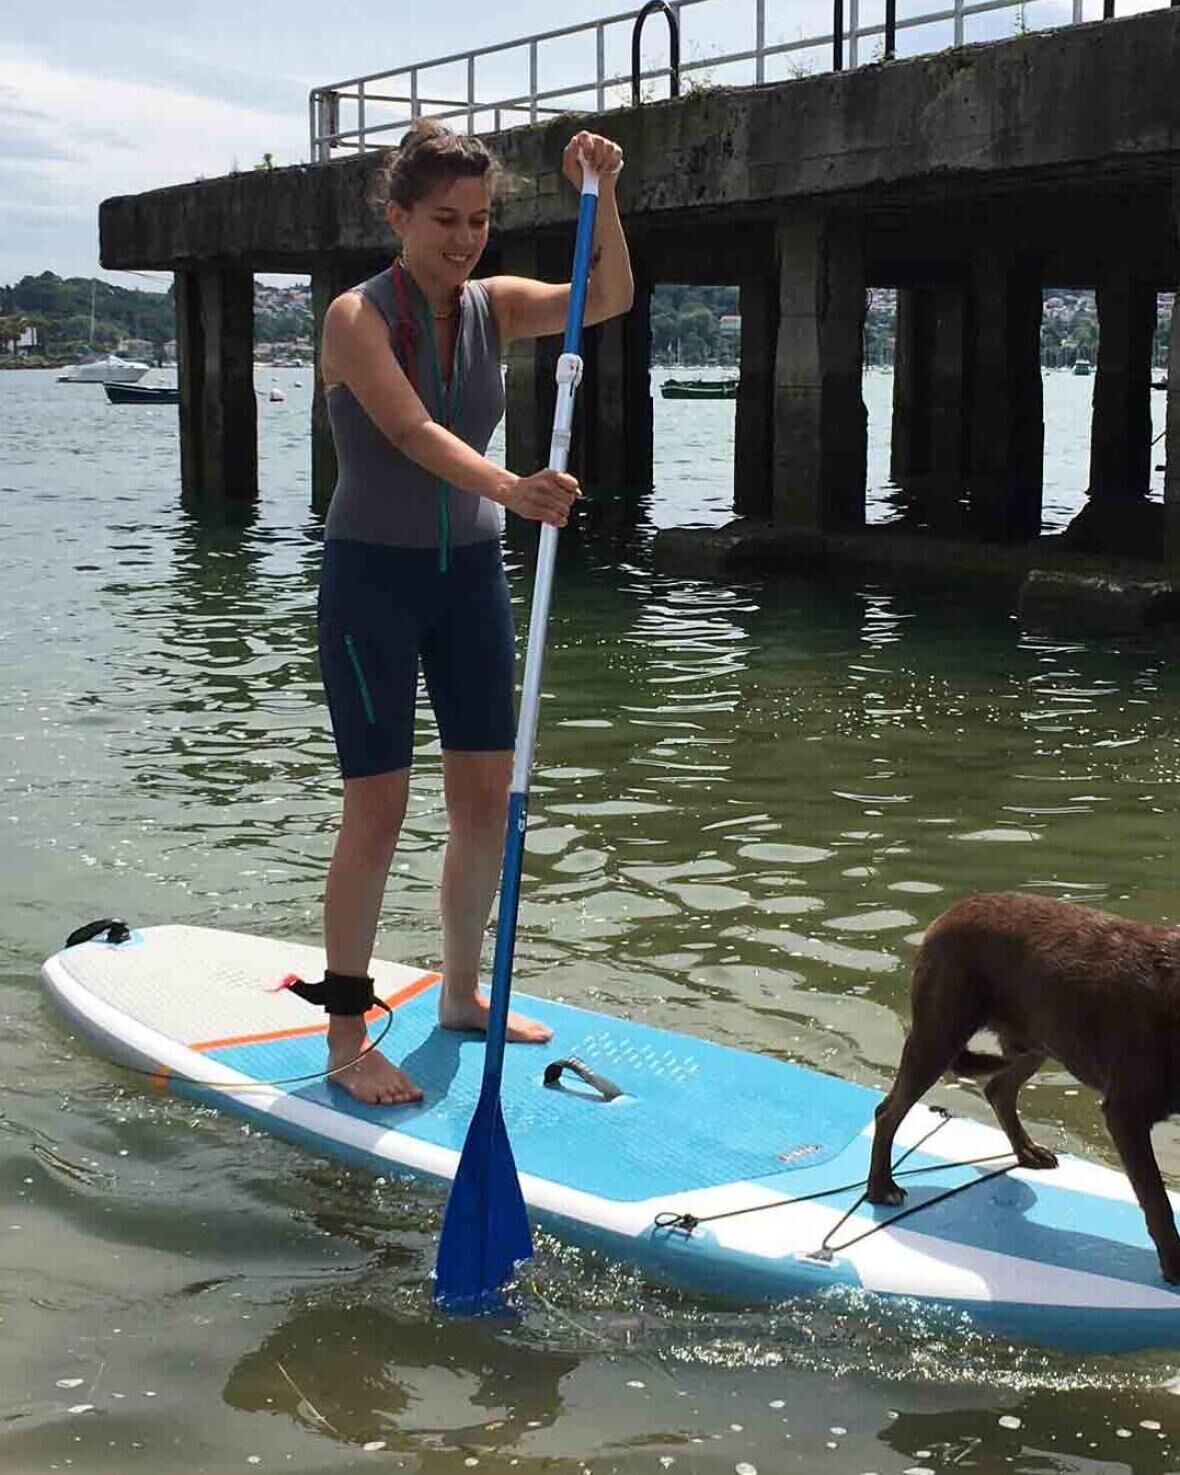 stand up paddle avec chien